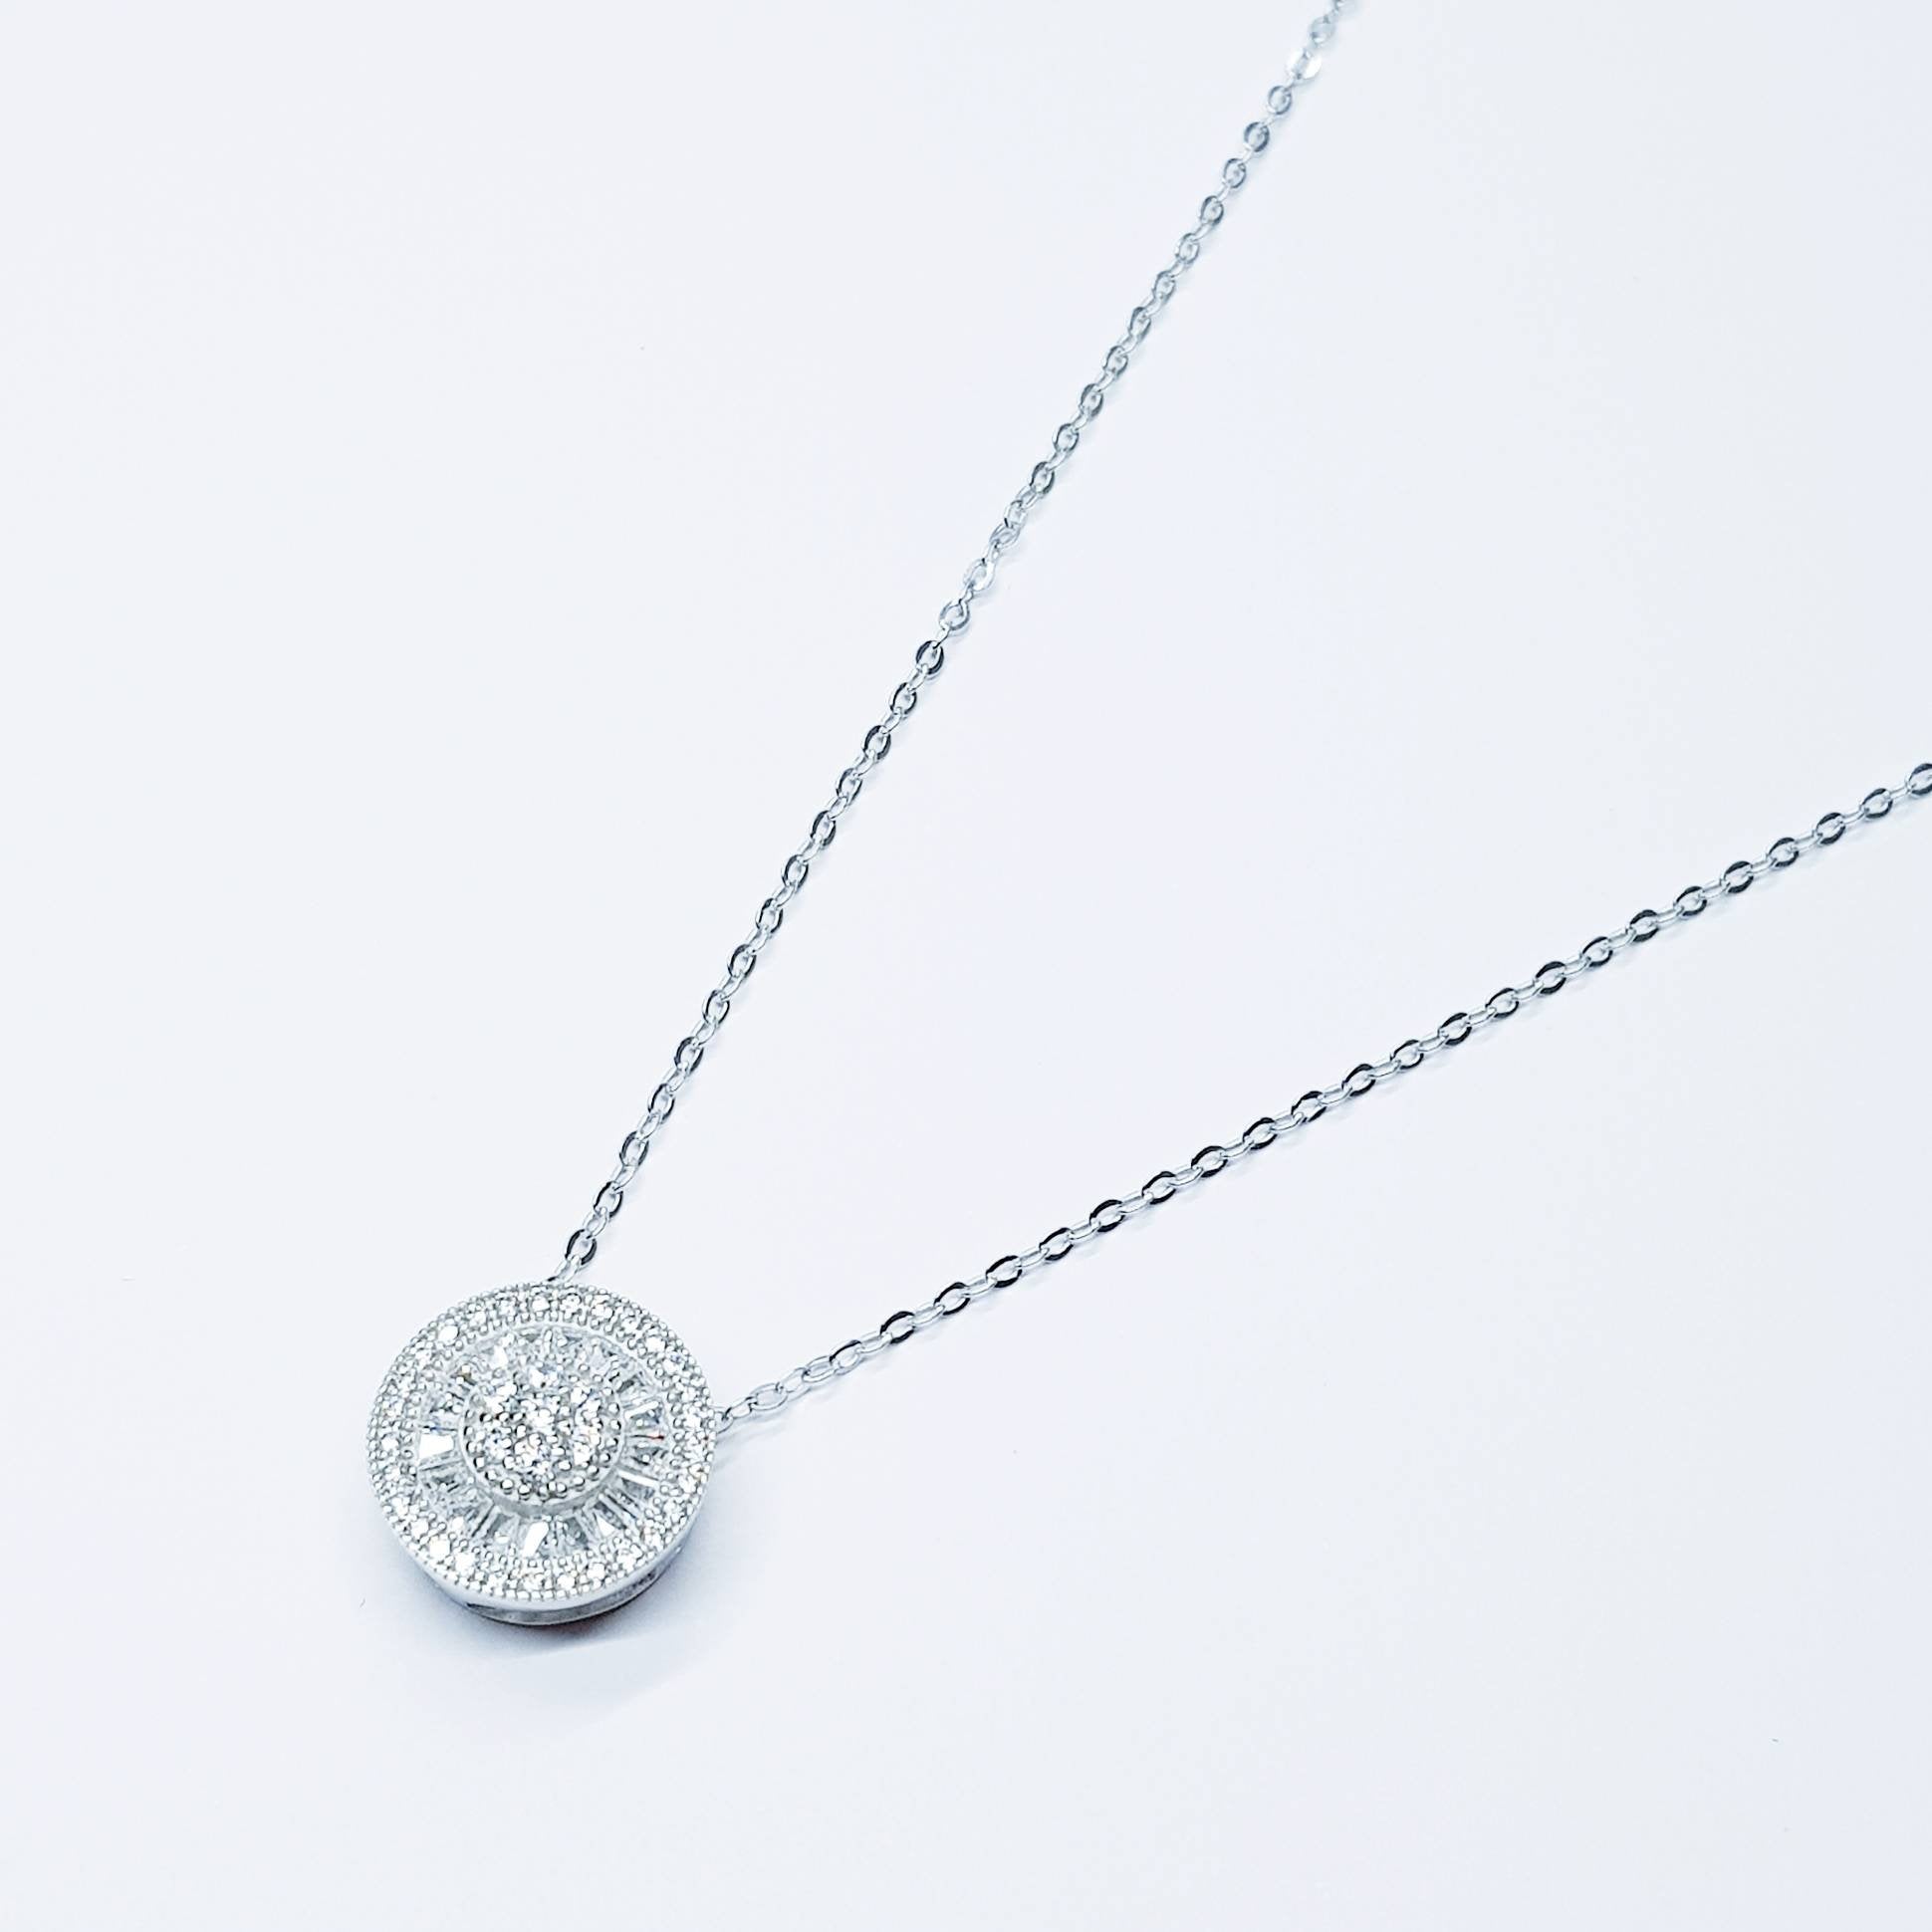 Vintage style round necklace floating on sterling silver chain